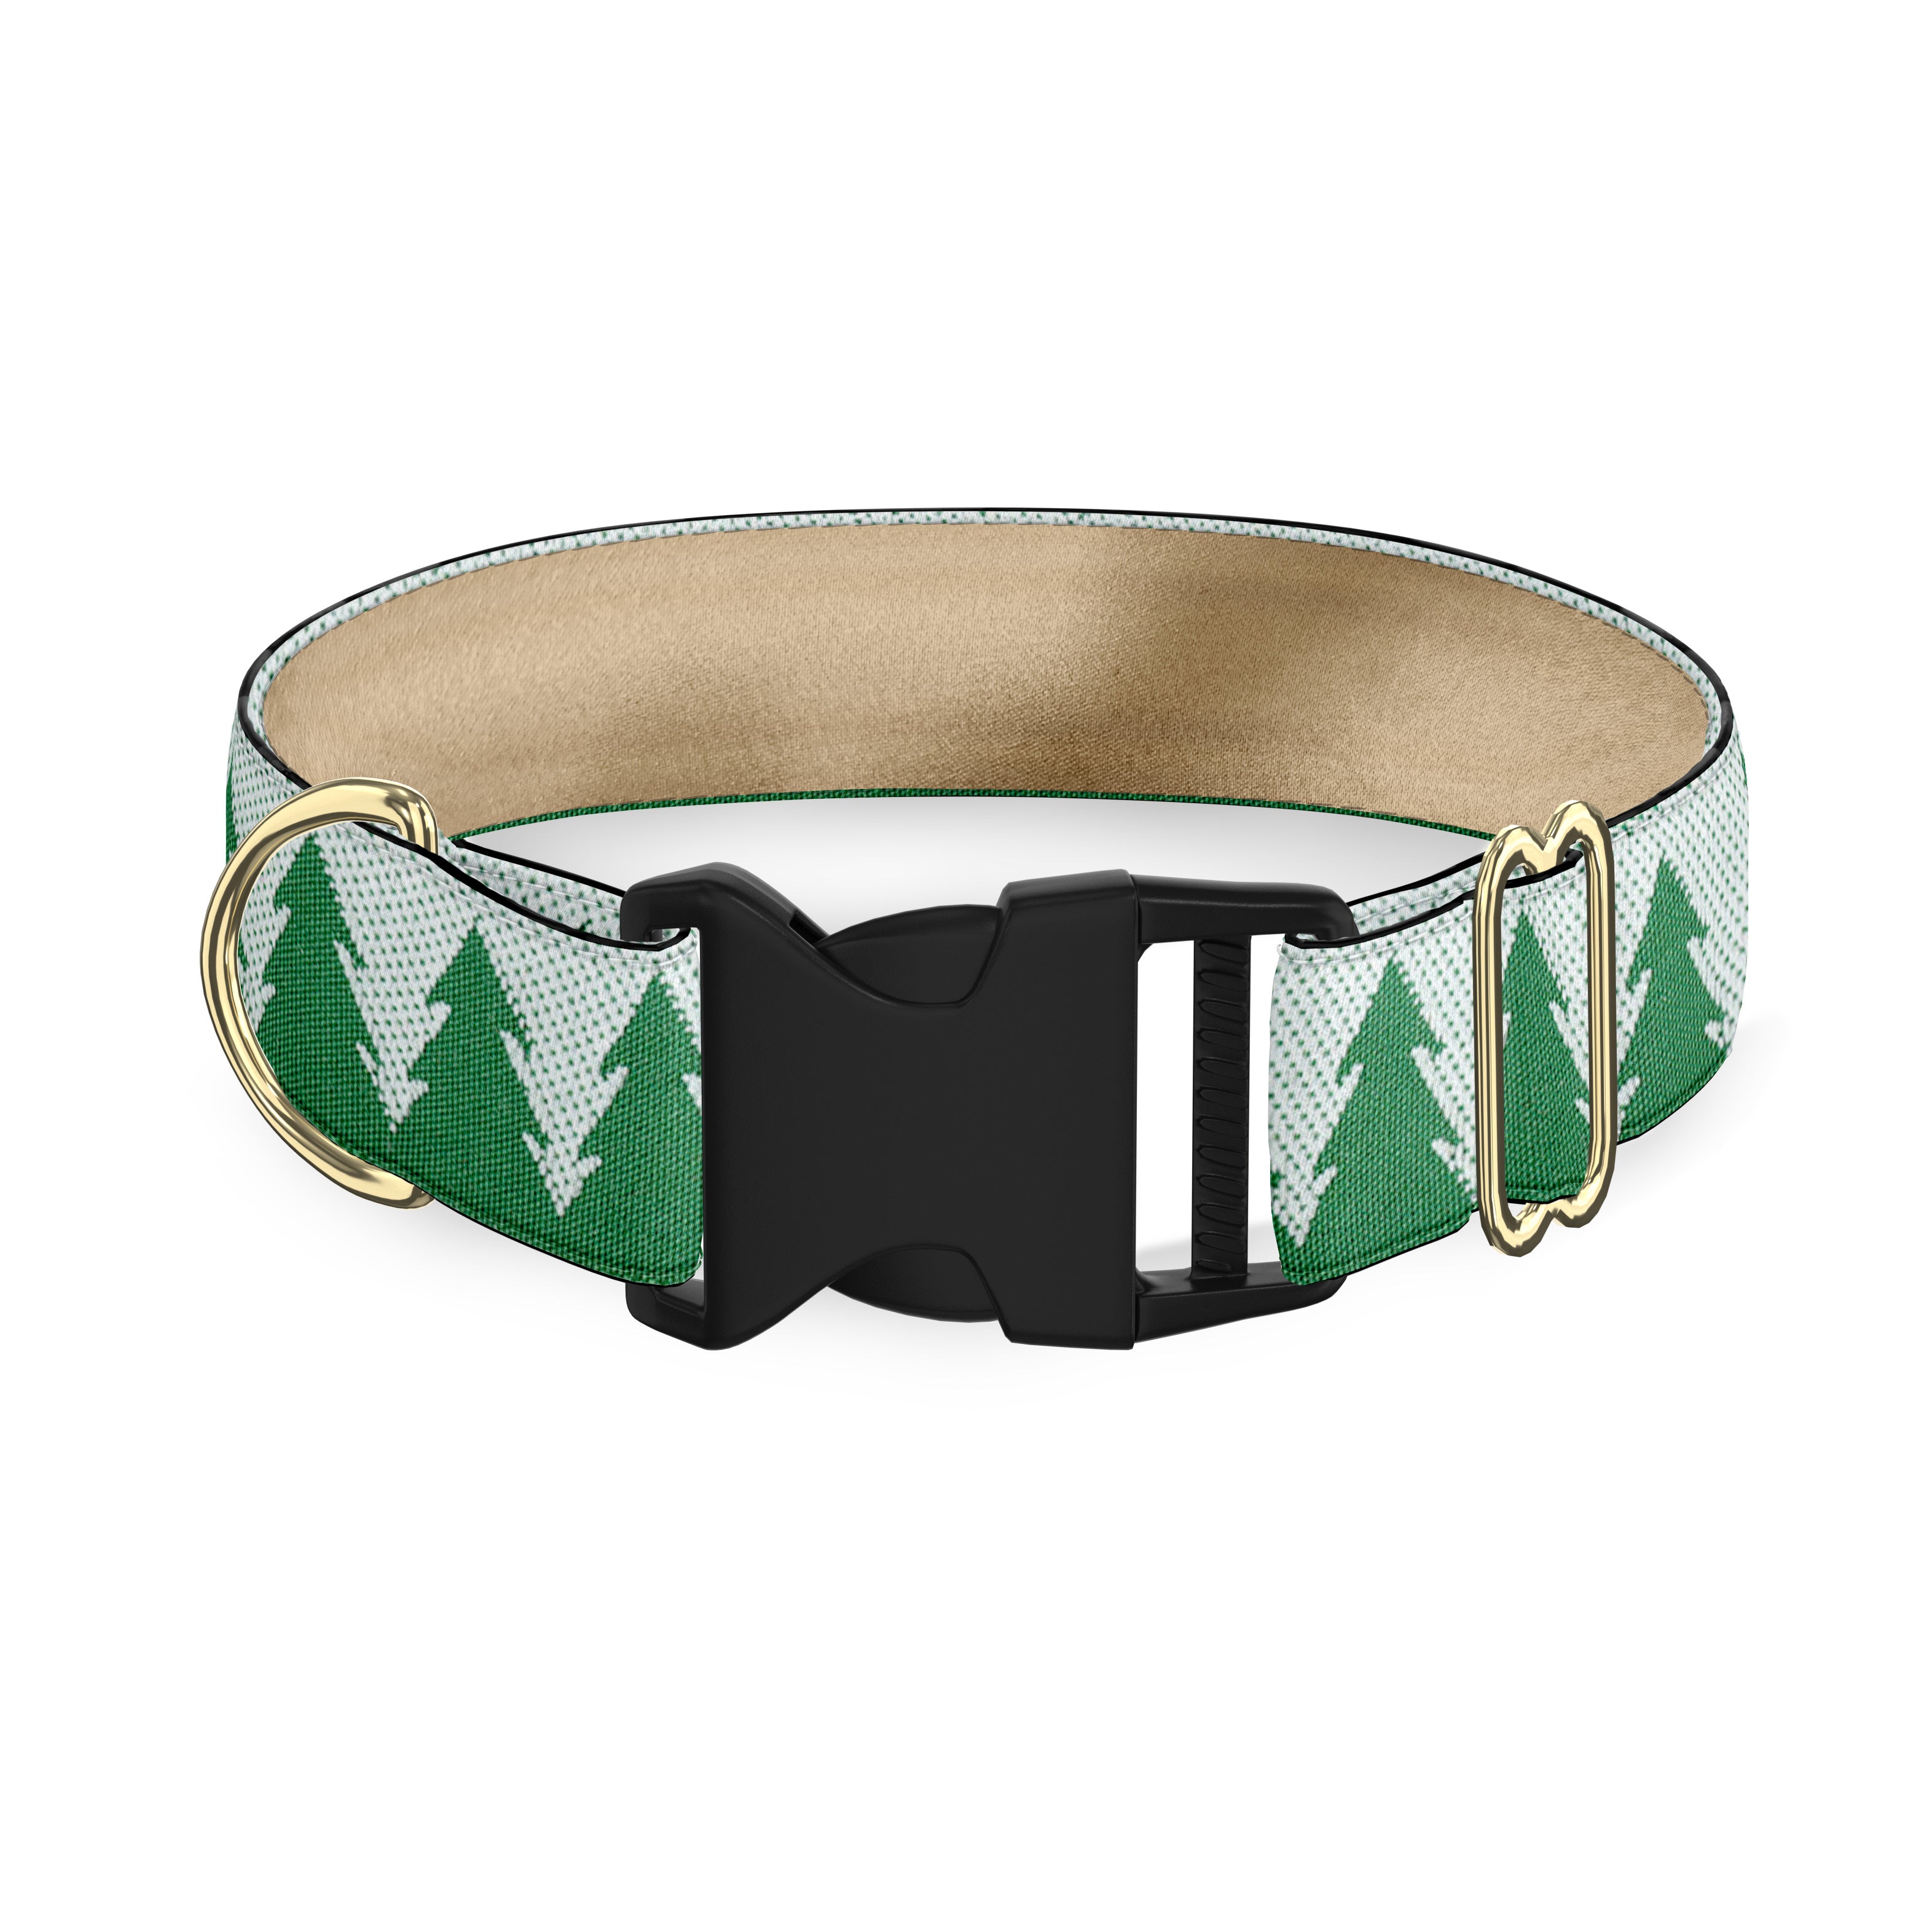 Inverted Trees 1 Inch Dog Collar